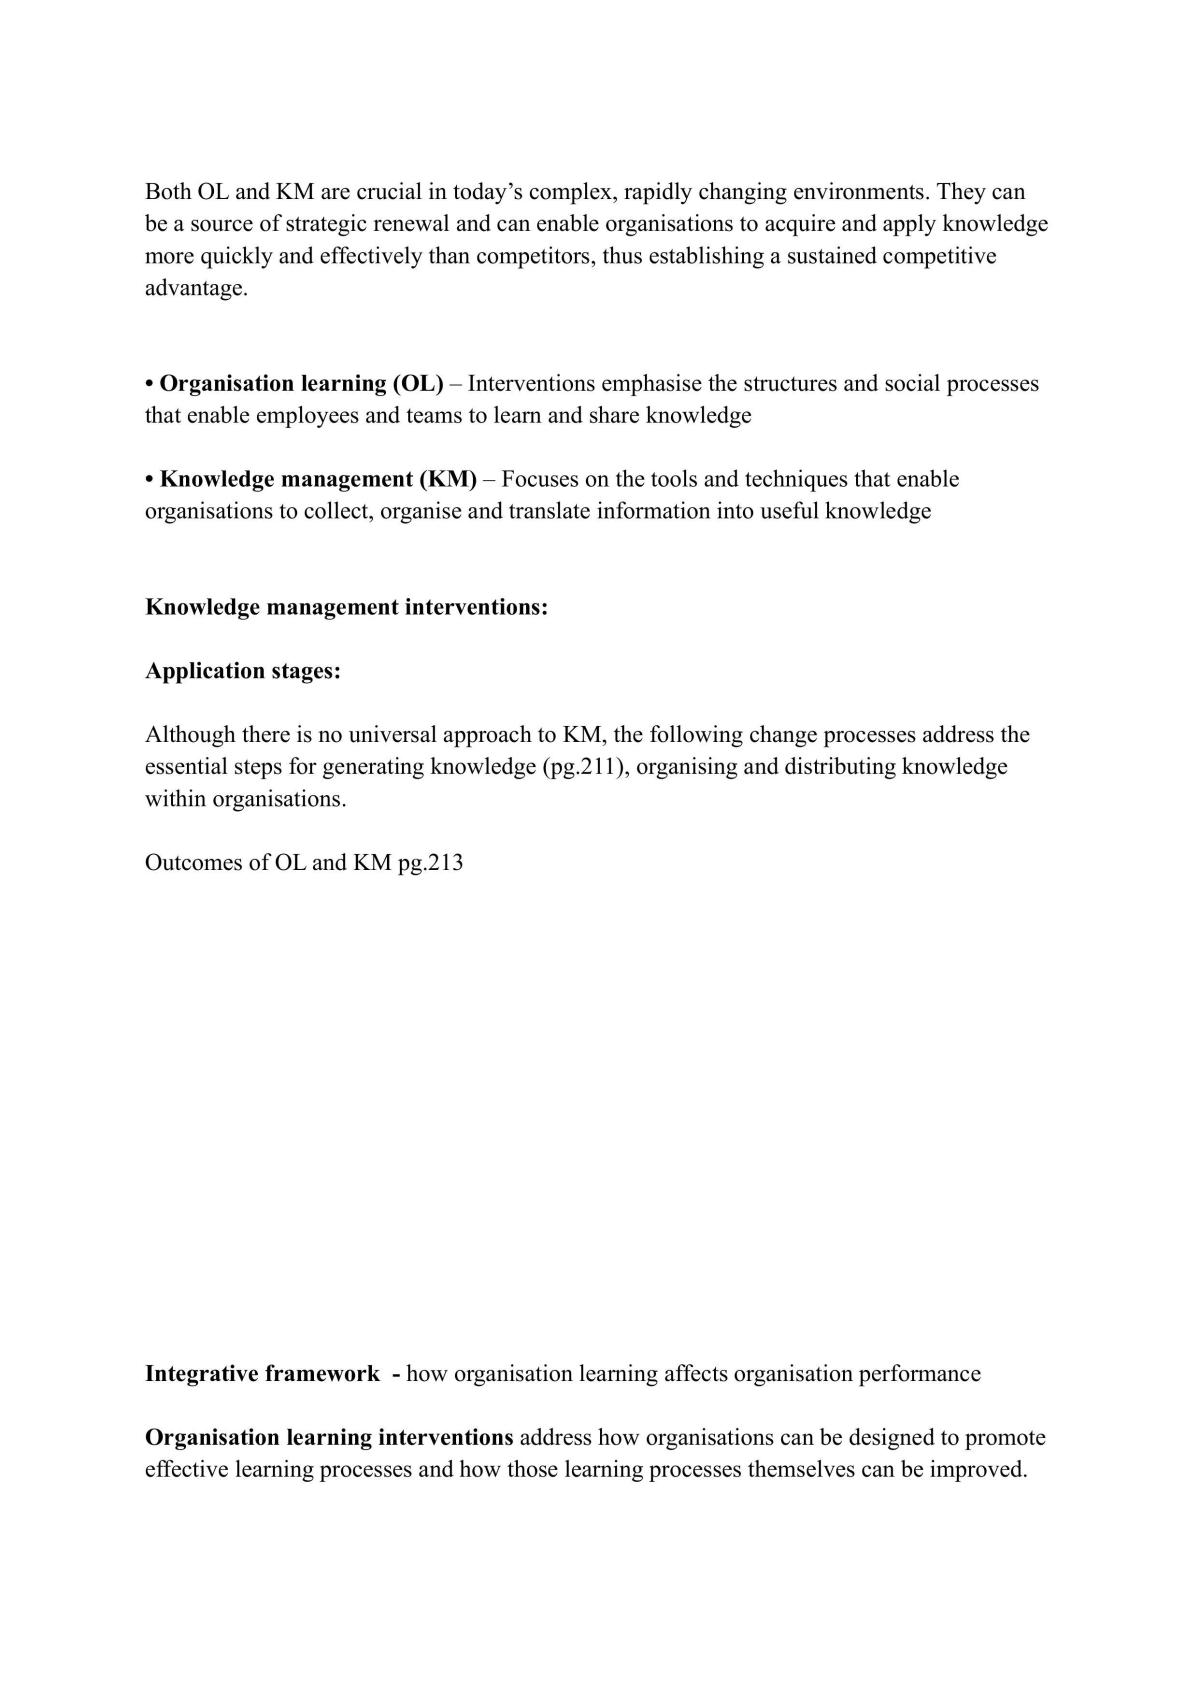 Mgmt3346 Study notes  - Page 24